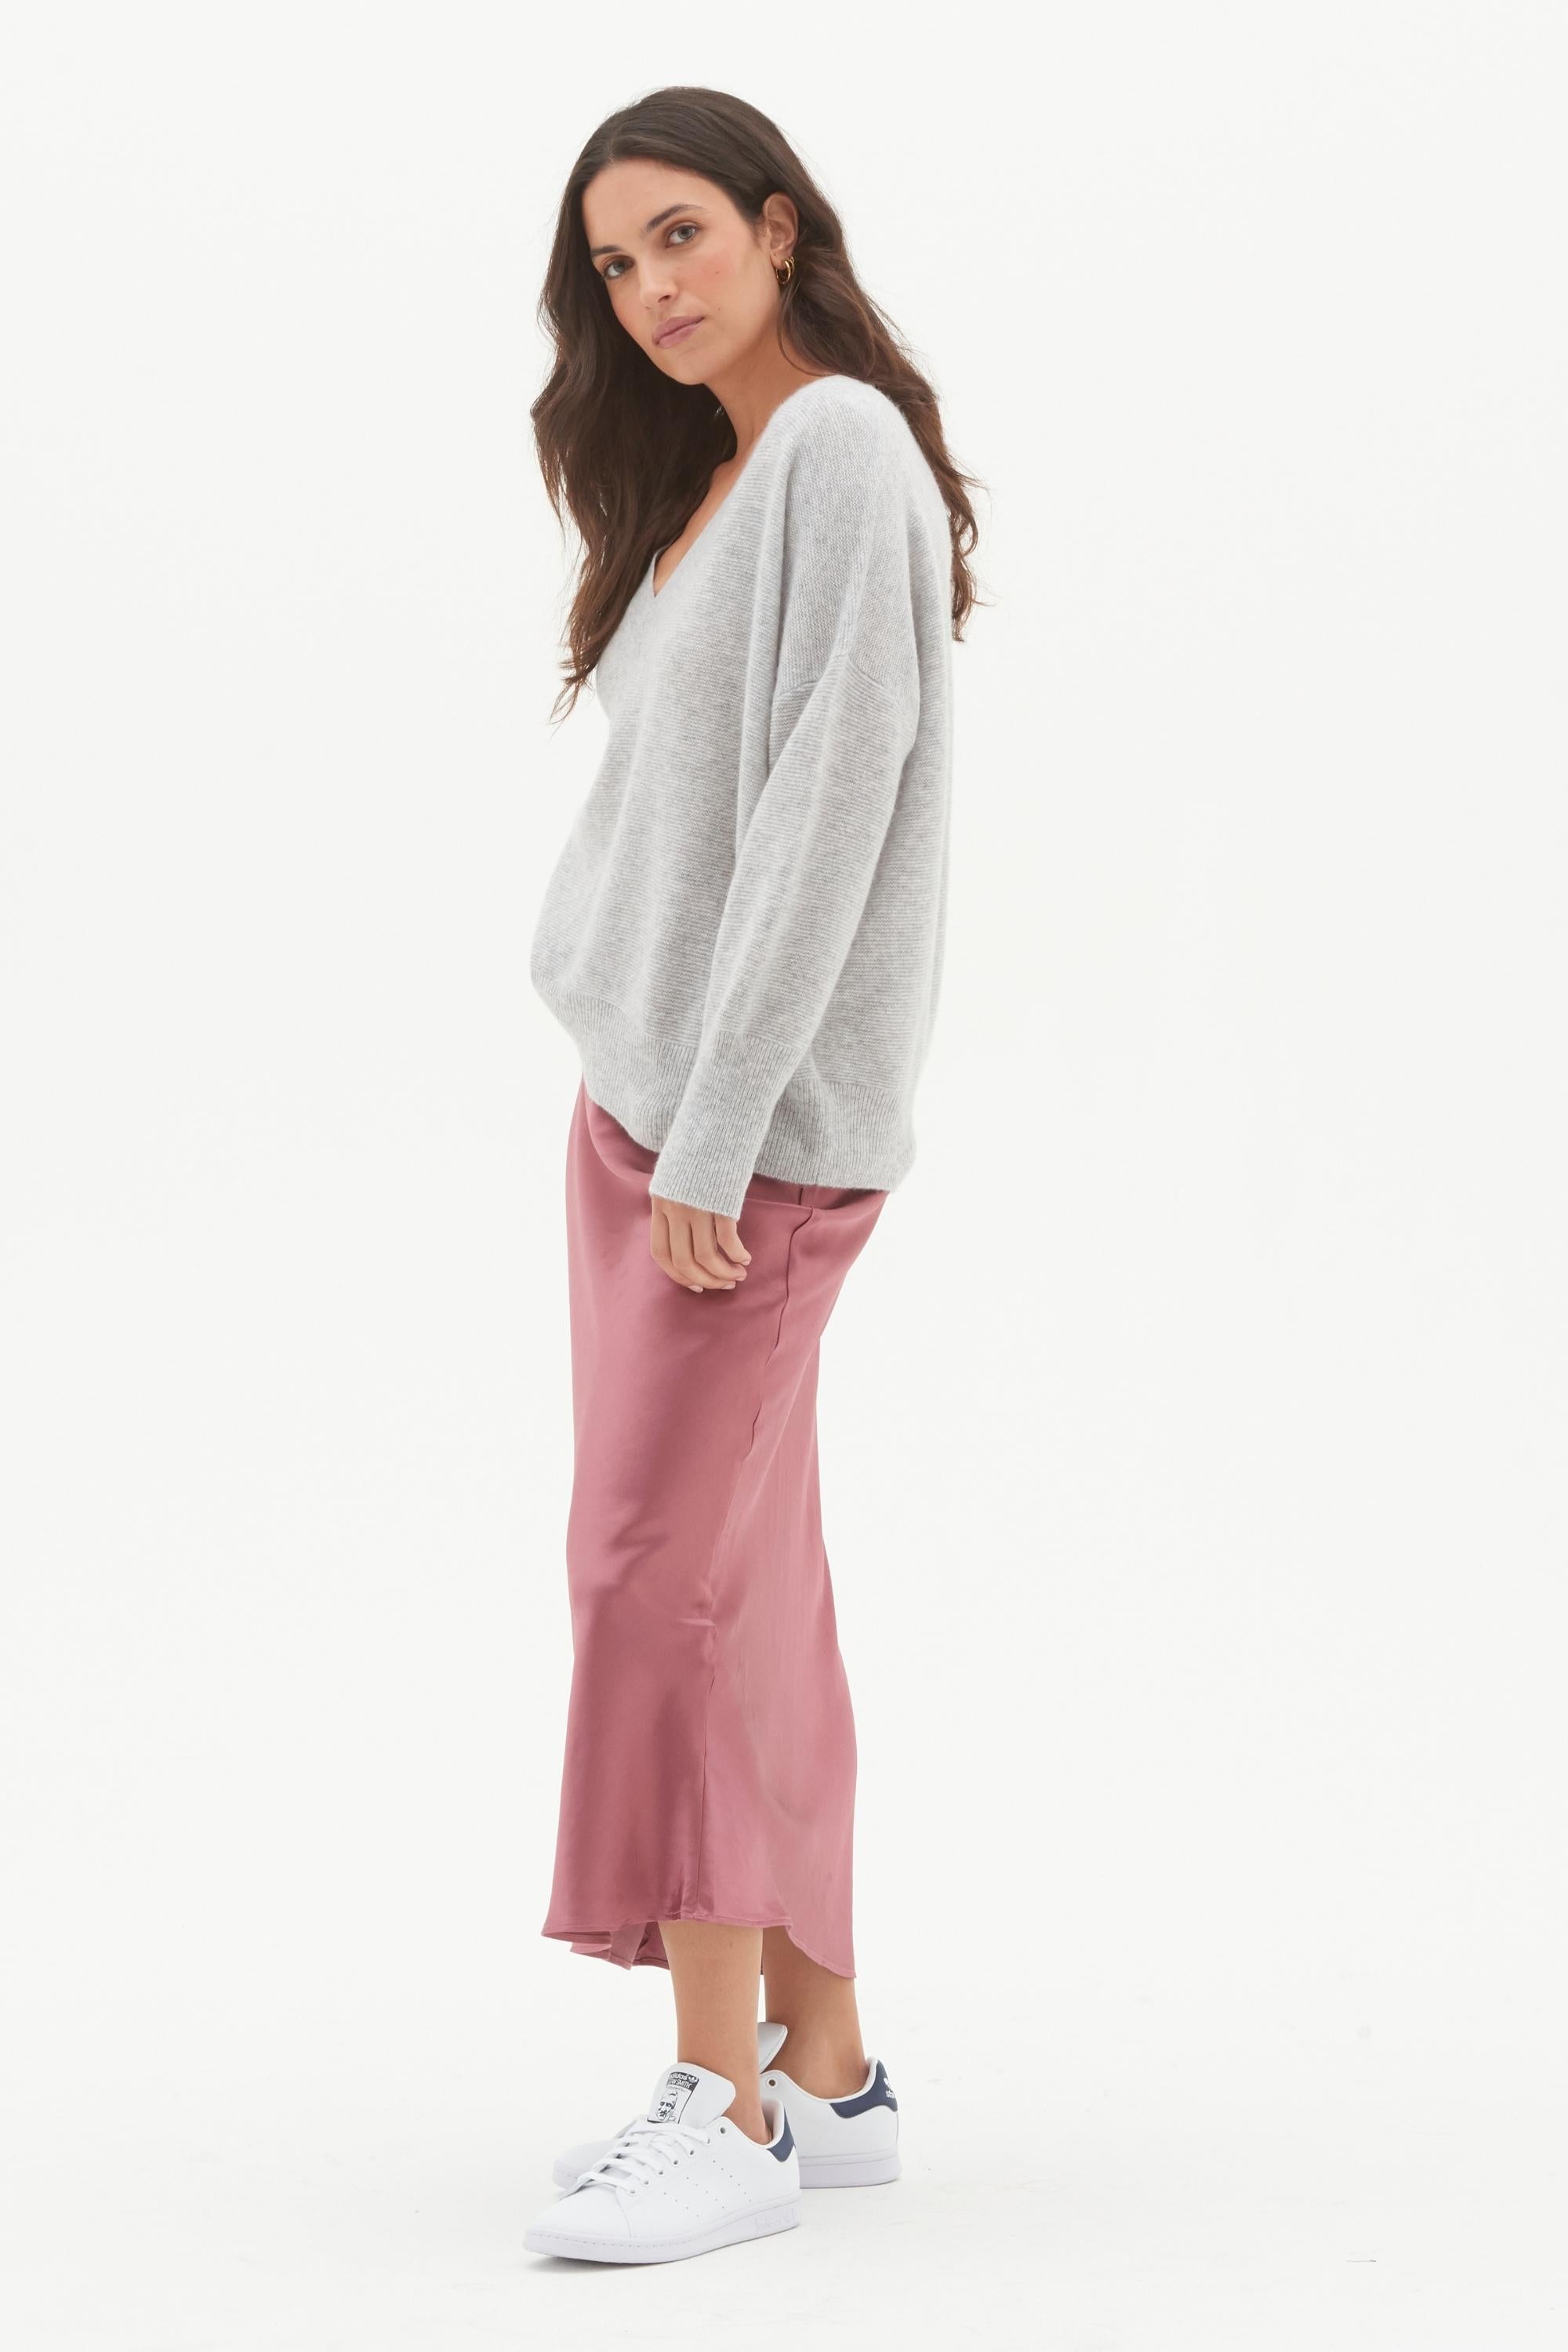 Relaxed V Neck Cashmere Sweater - Made to Order